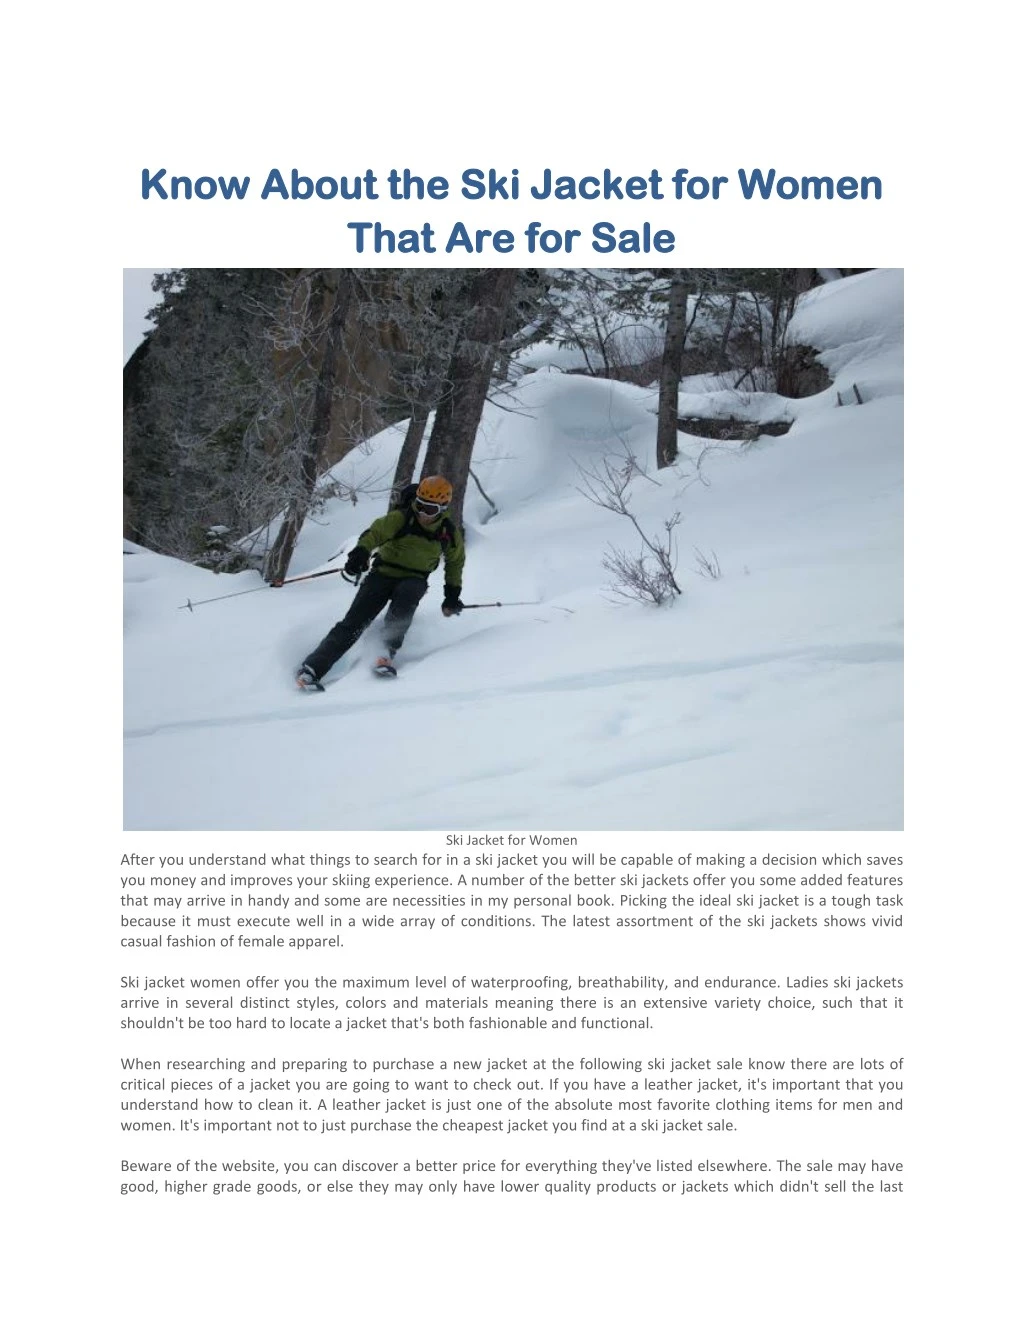 know about the ski jacket for women know about